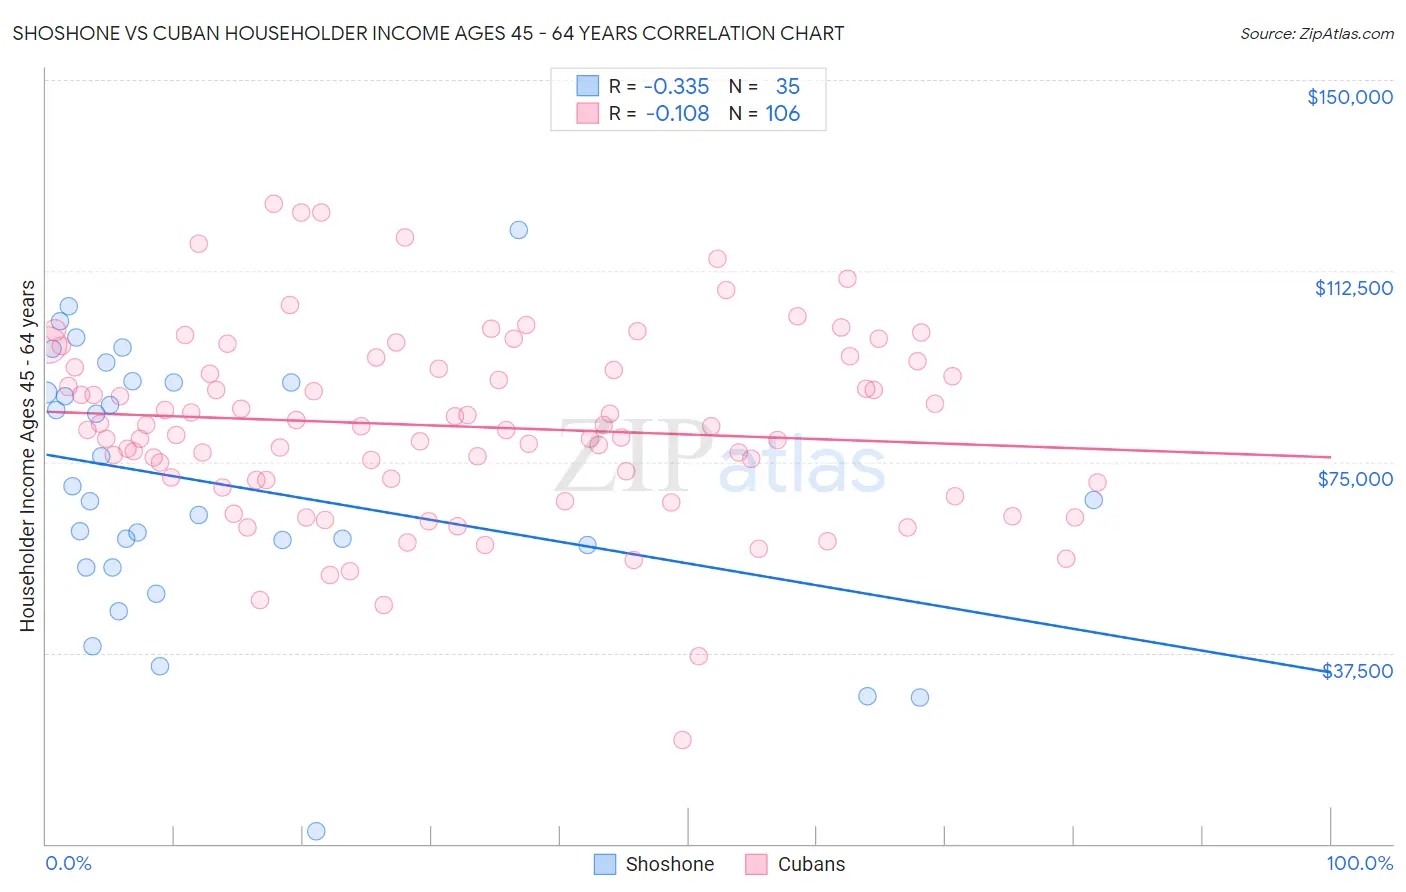 Shoshone vs Cuban Householder Income Ages 45 - 64 years